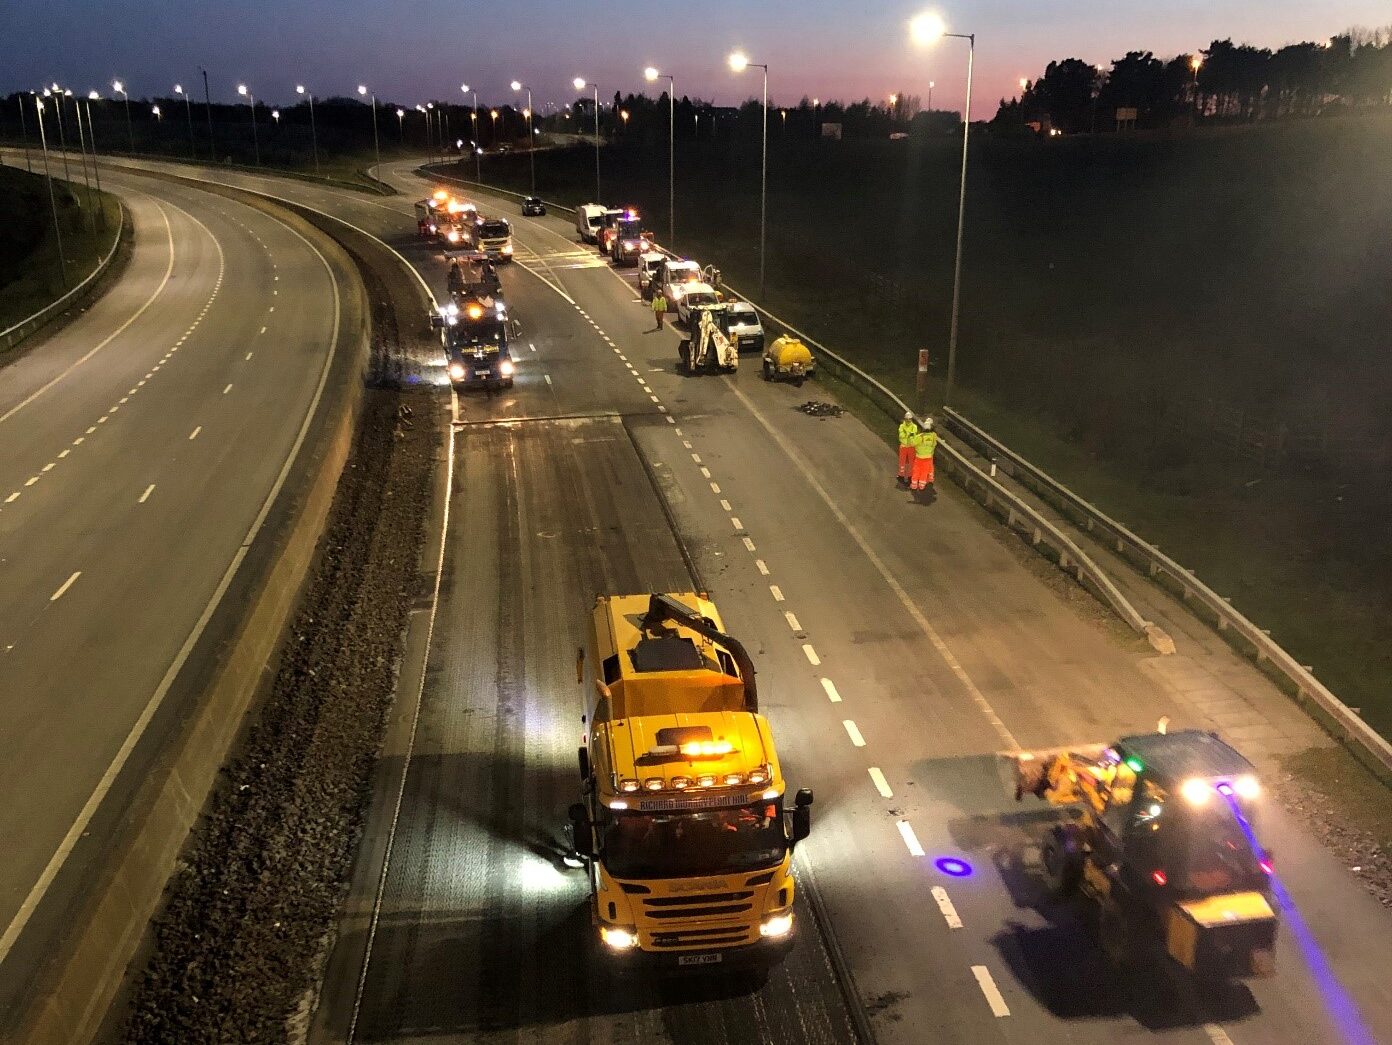 OVERNIGHT LANE AND CARRIAGEWAY CLOSURES FOR M80 MAINTENANCE